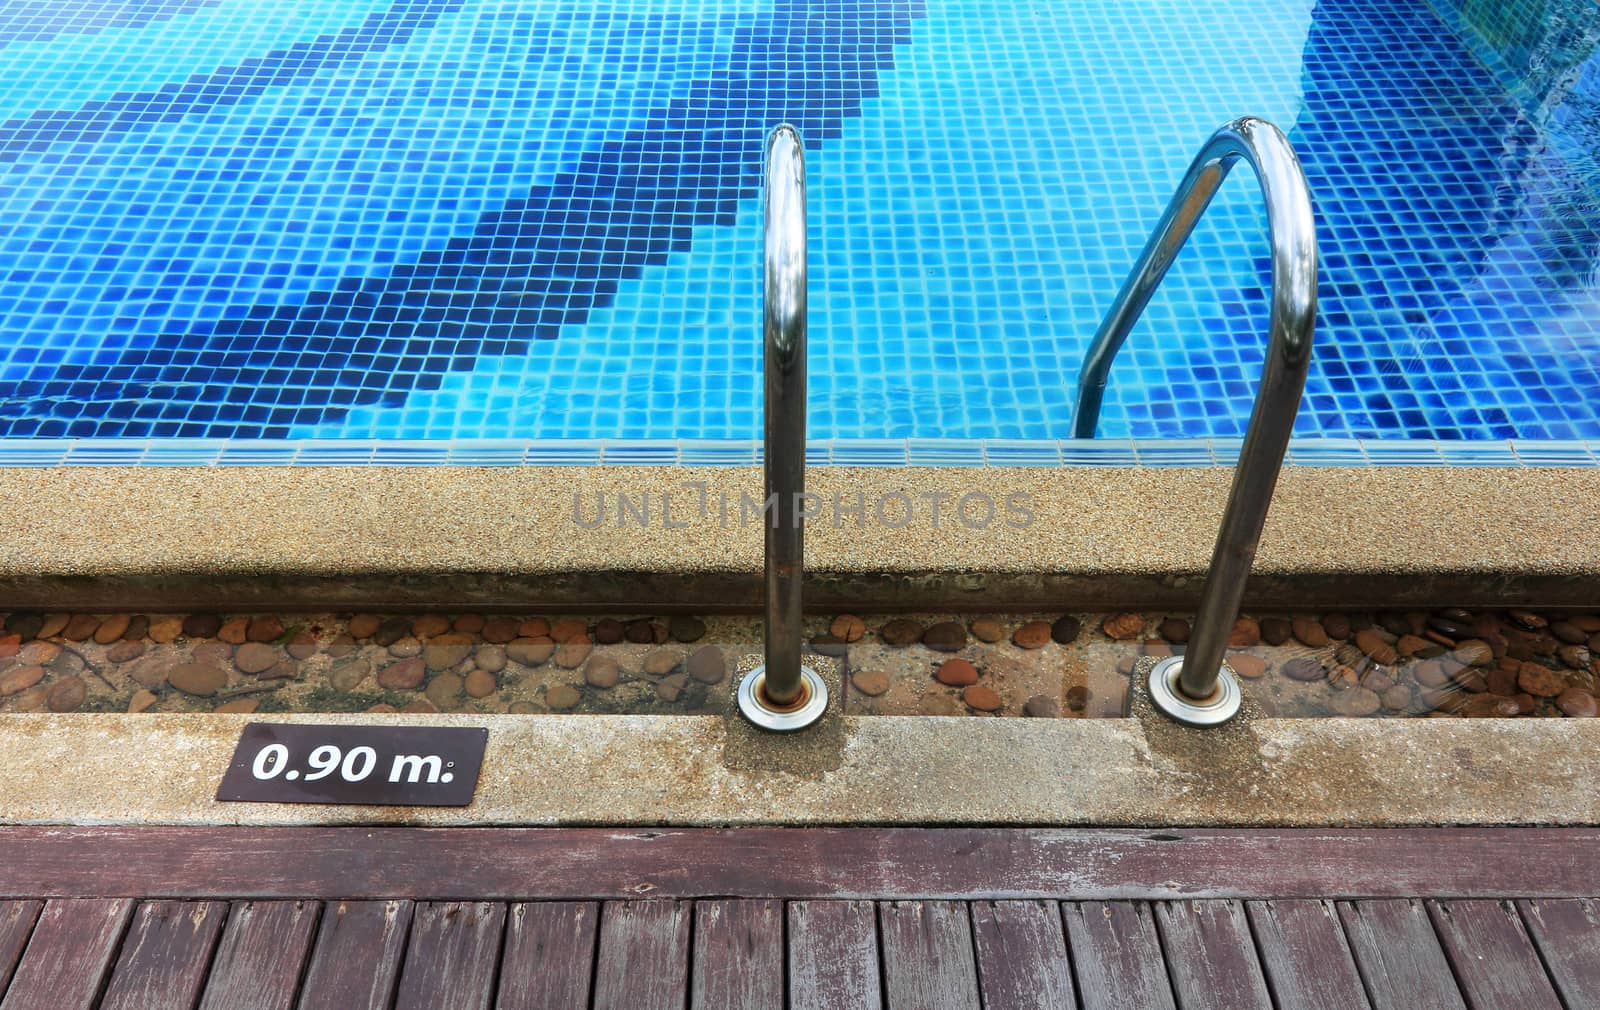 Pool edge with ladder and swimming pool depth marker